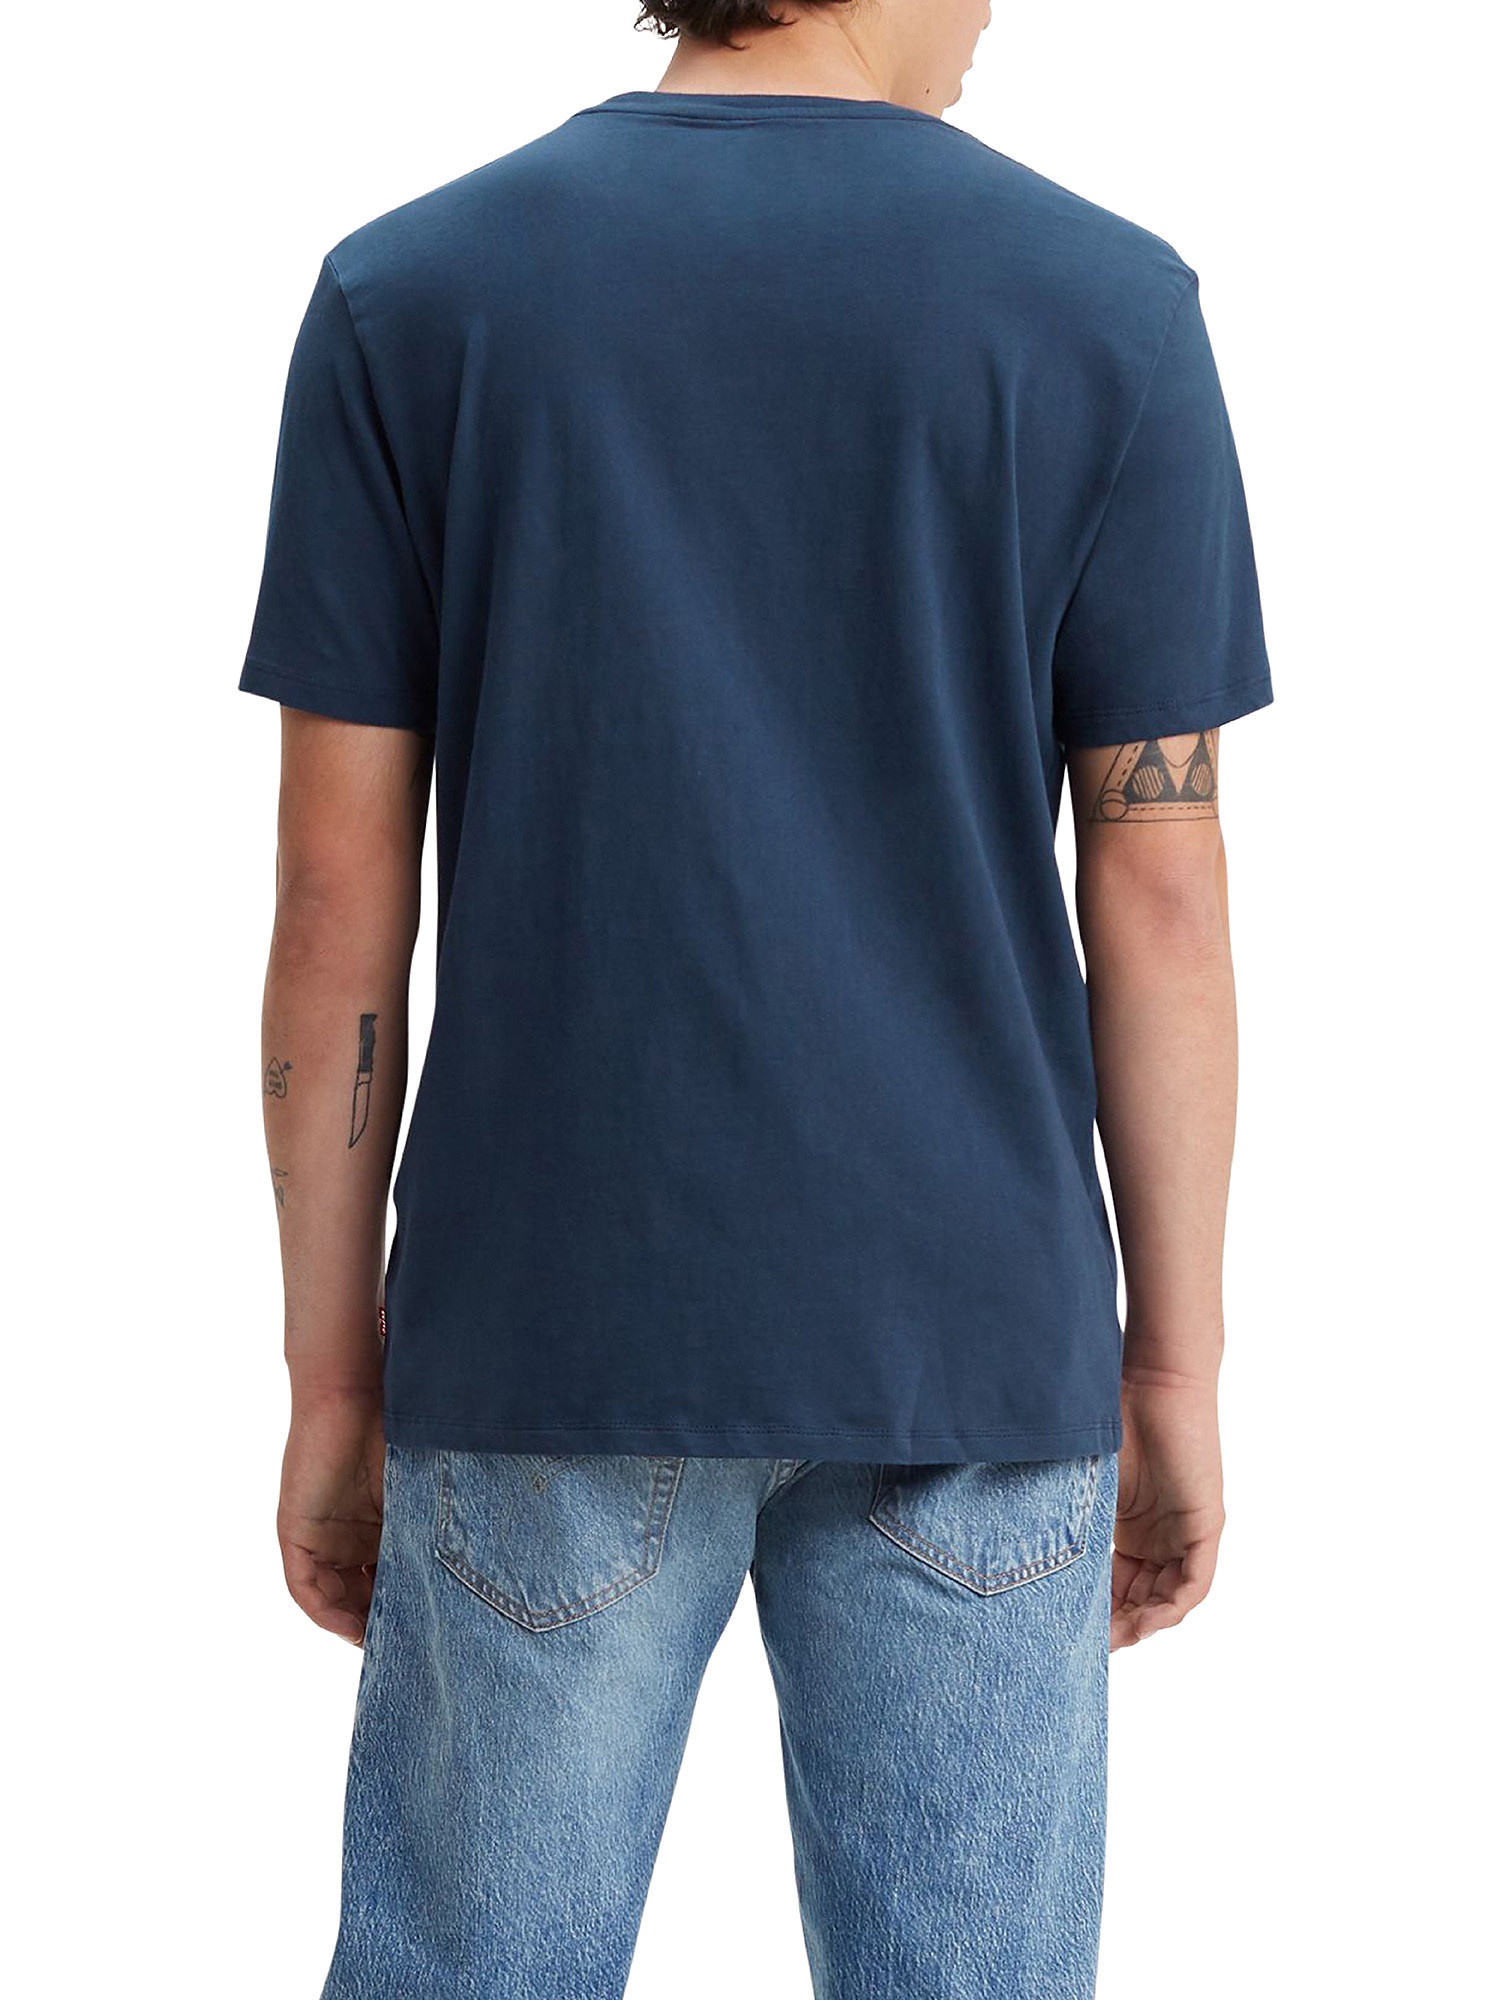 Graphic Tee, Blue, large image number 3